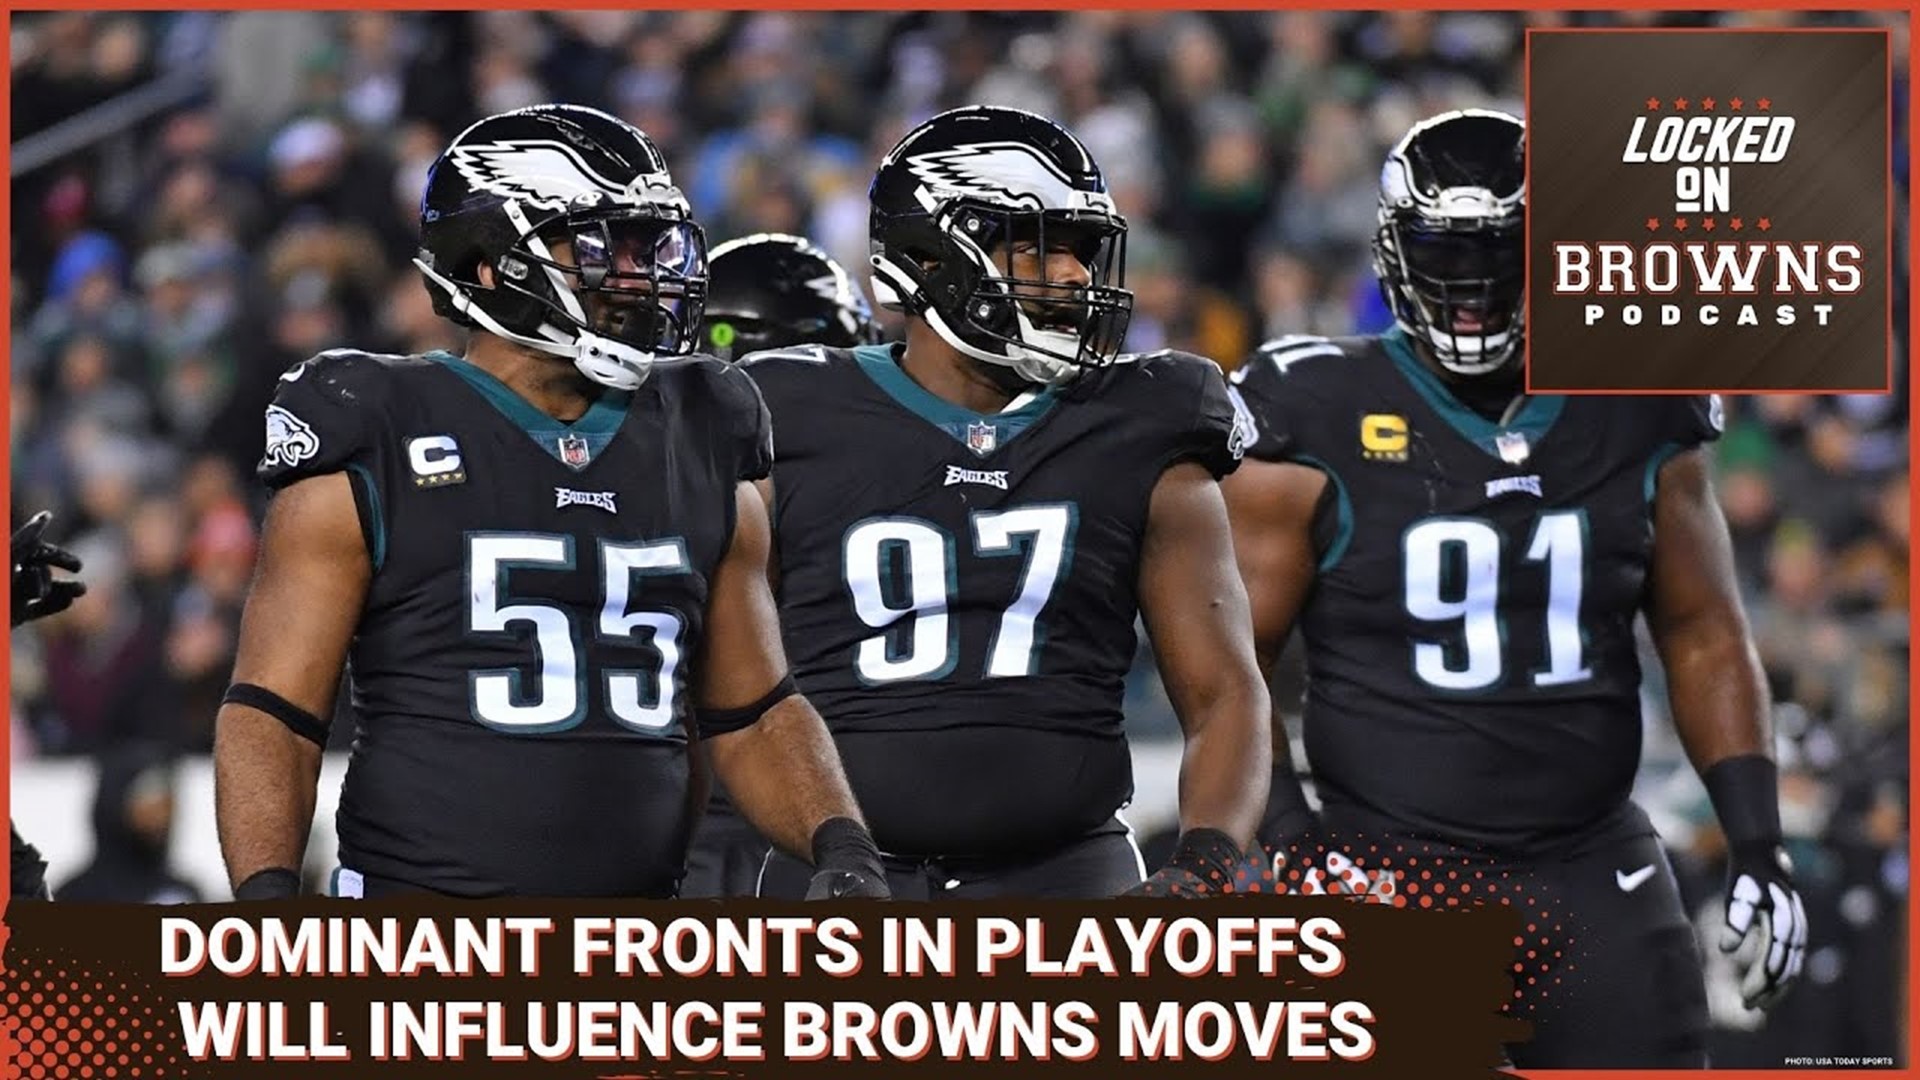 The Browns are currently in the process of rebuilding their defensive line.